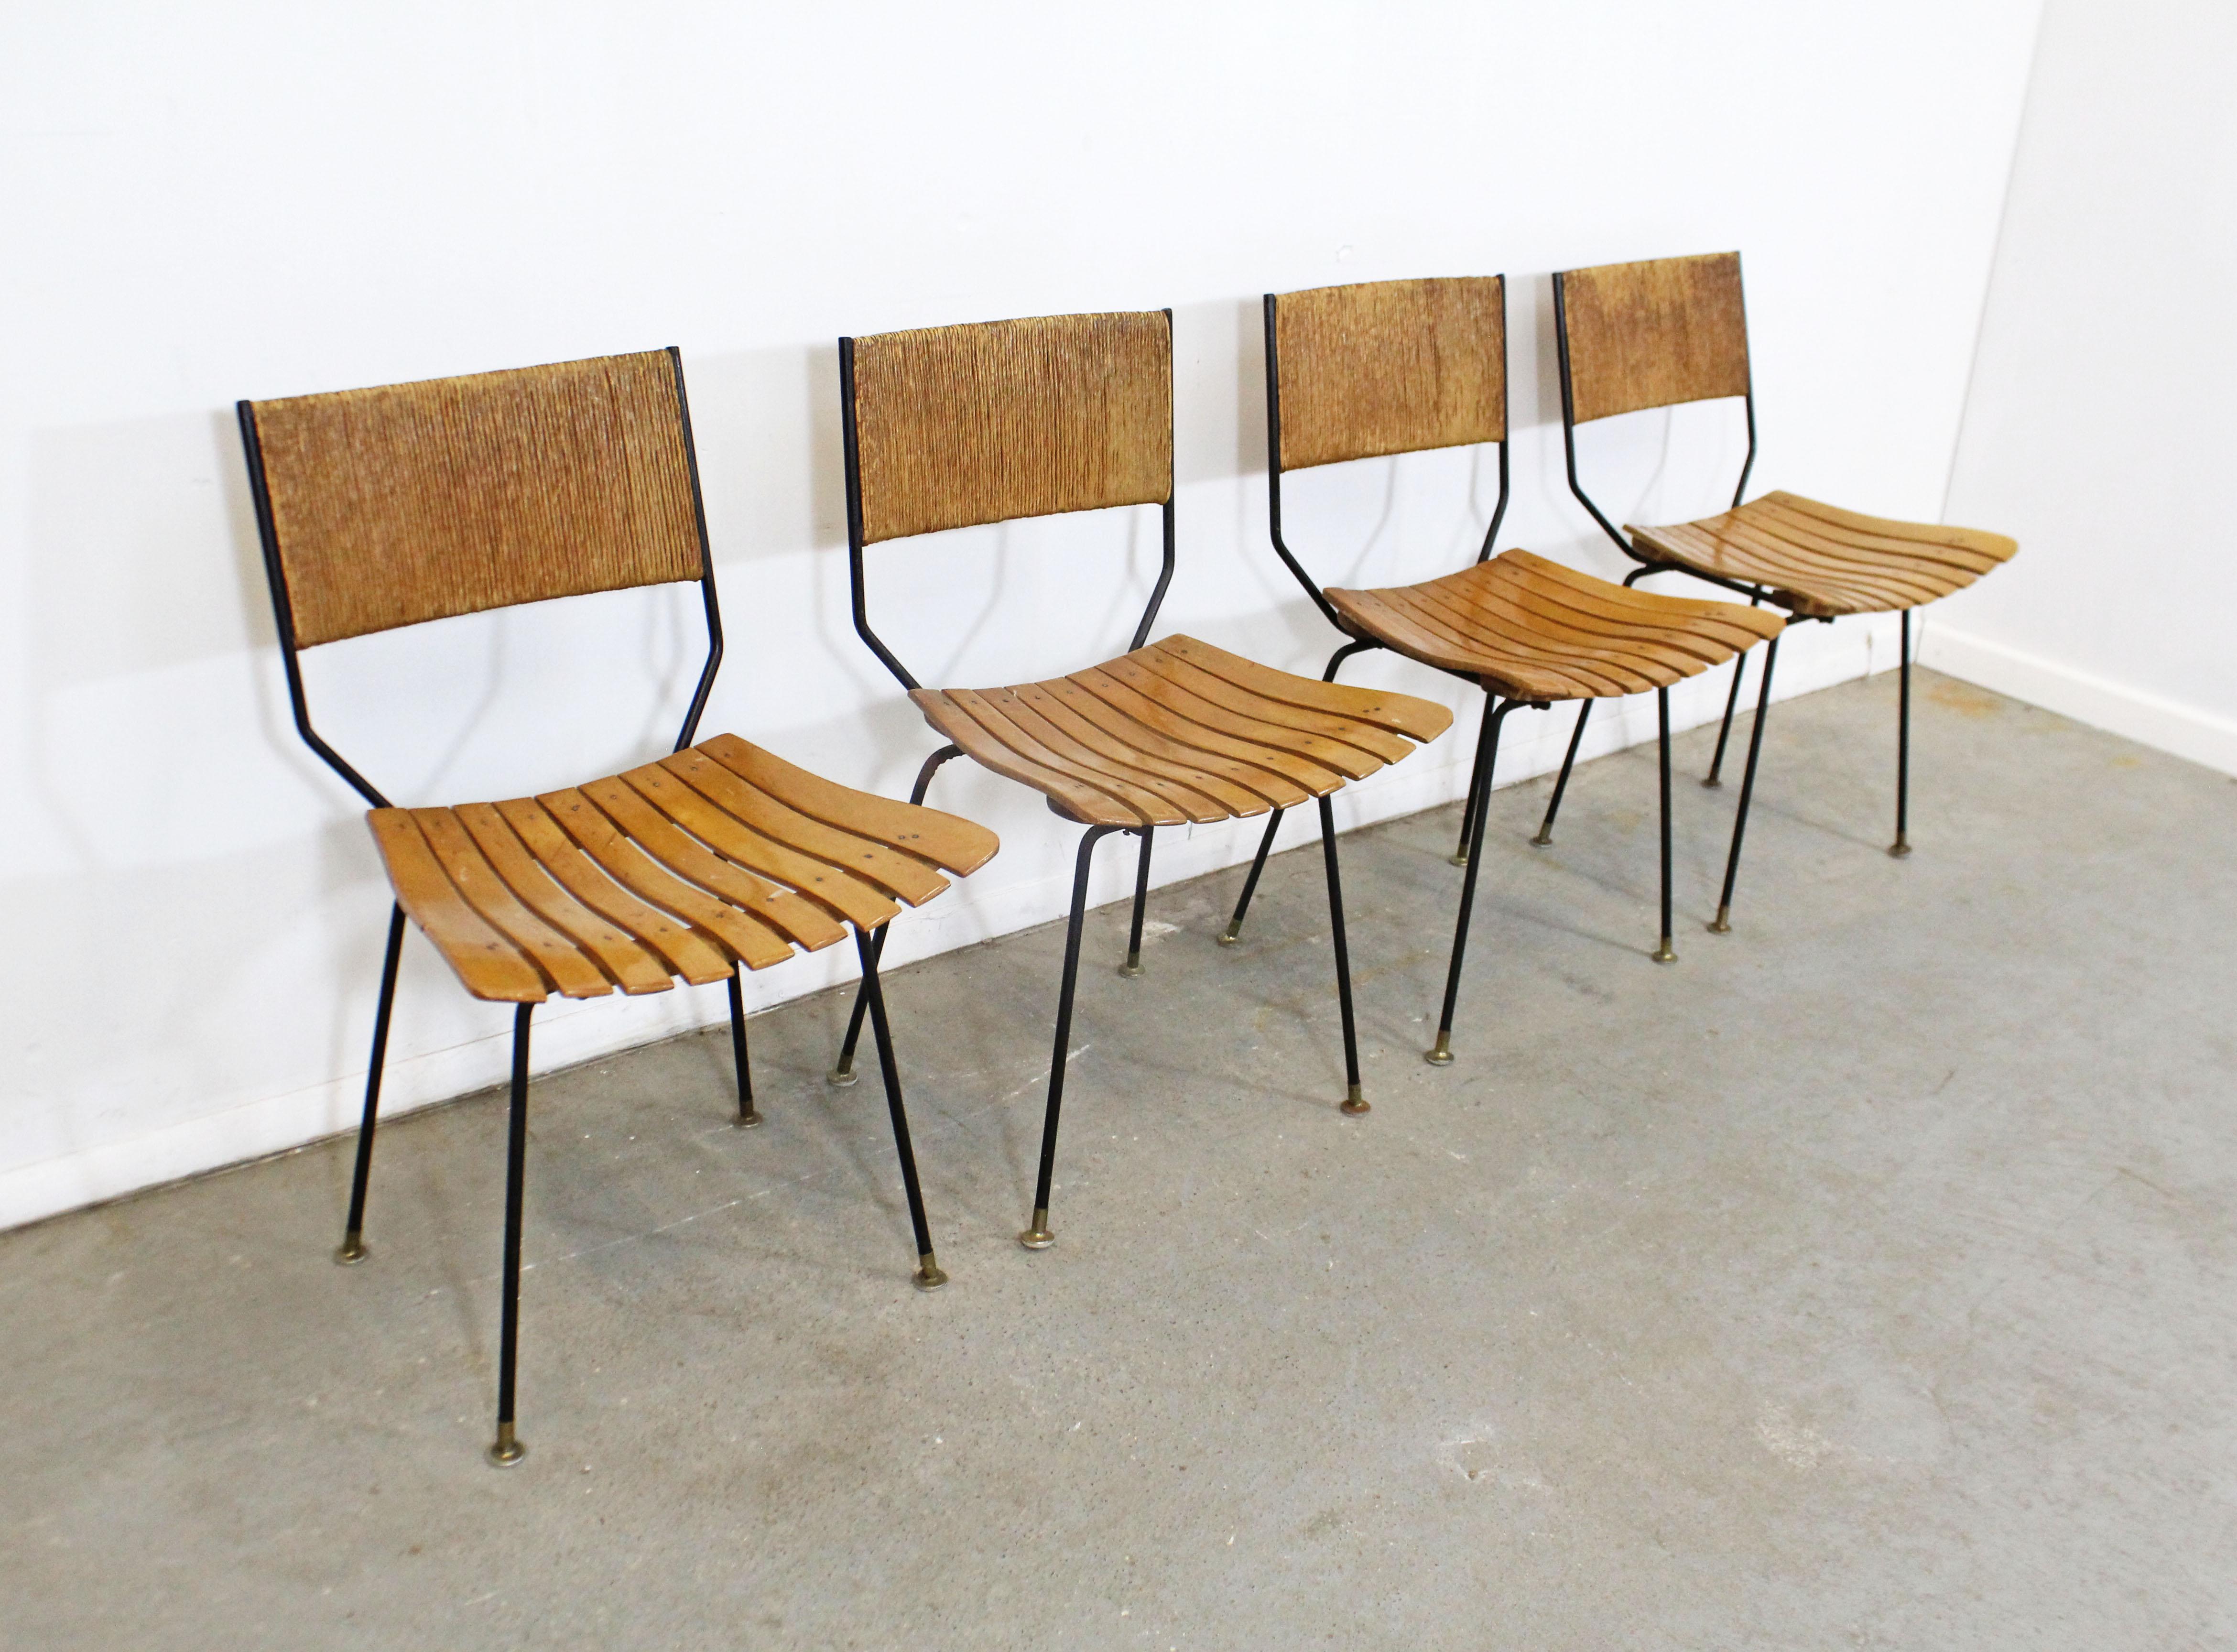 Offered is a set of 4 vintage Mid-Century Modern dining chairs attributed to Arthur Umanoff for Raymor. These chairs have slat-wood seats and rush-backs with metal bases. They are in decent, structurally sound condition for their age, showing some